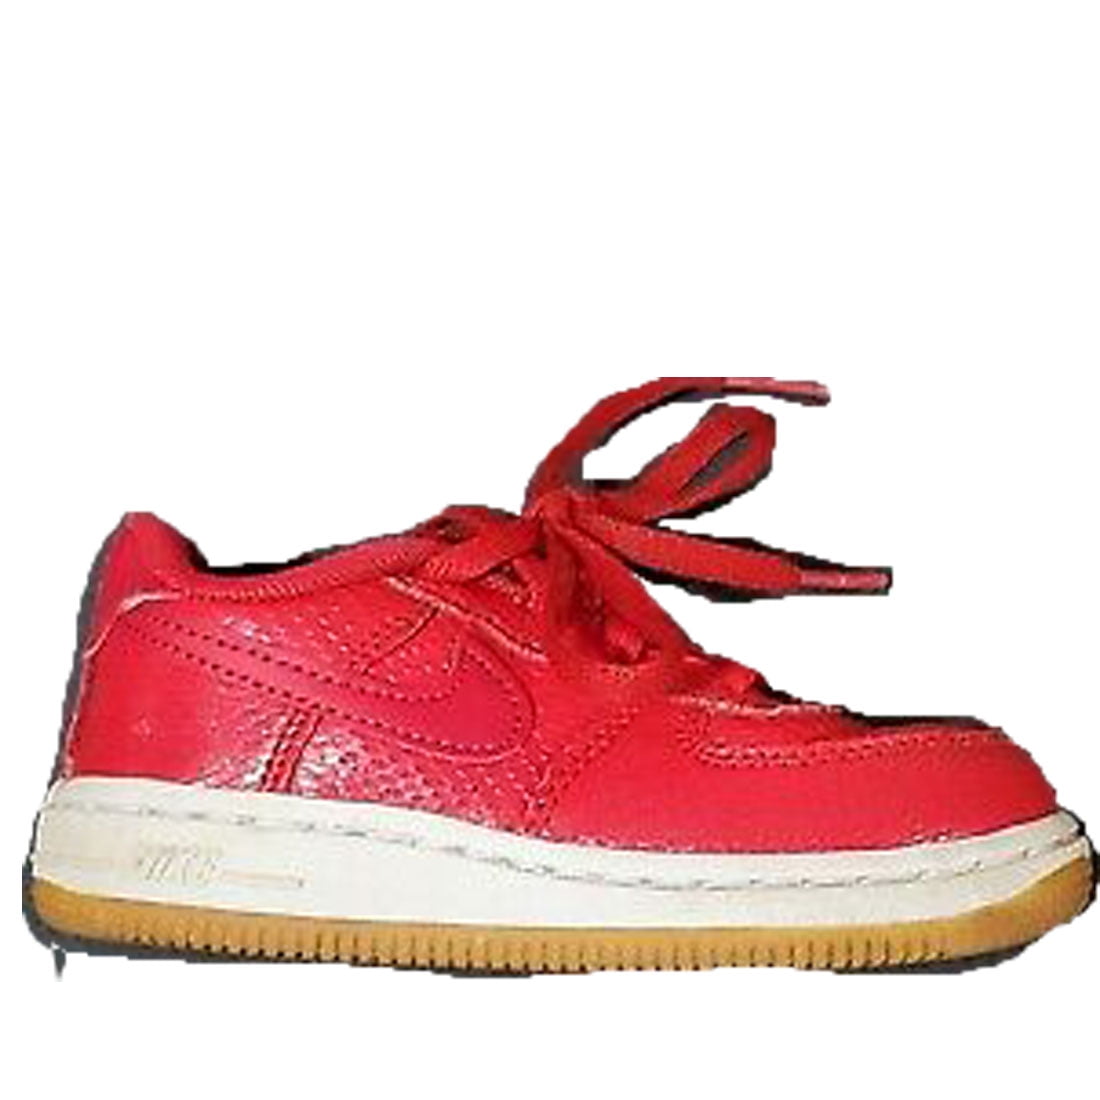 Nike Air Force One AF5 Men/Adult shoe size 7 Casual 596730-611 Red - Walmart.com